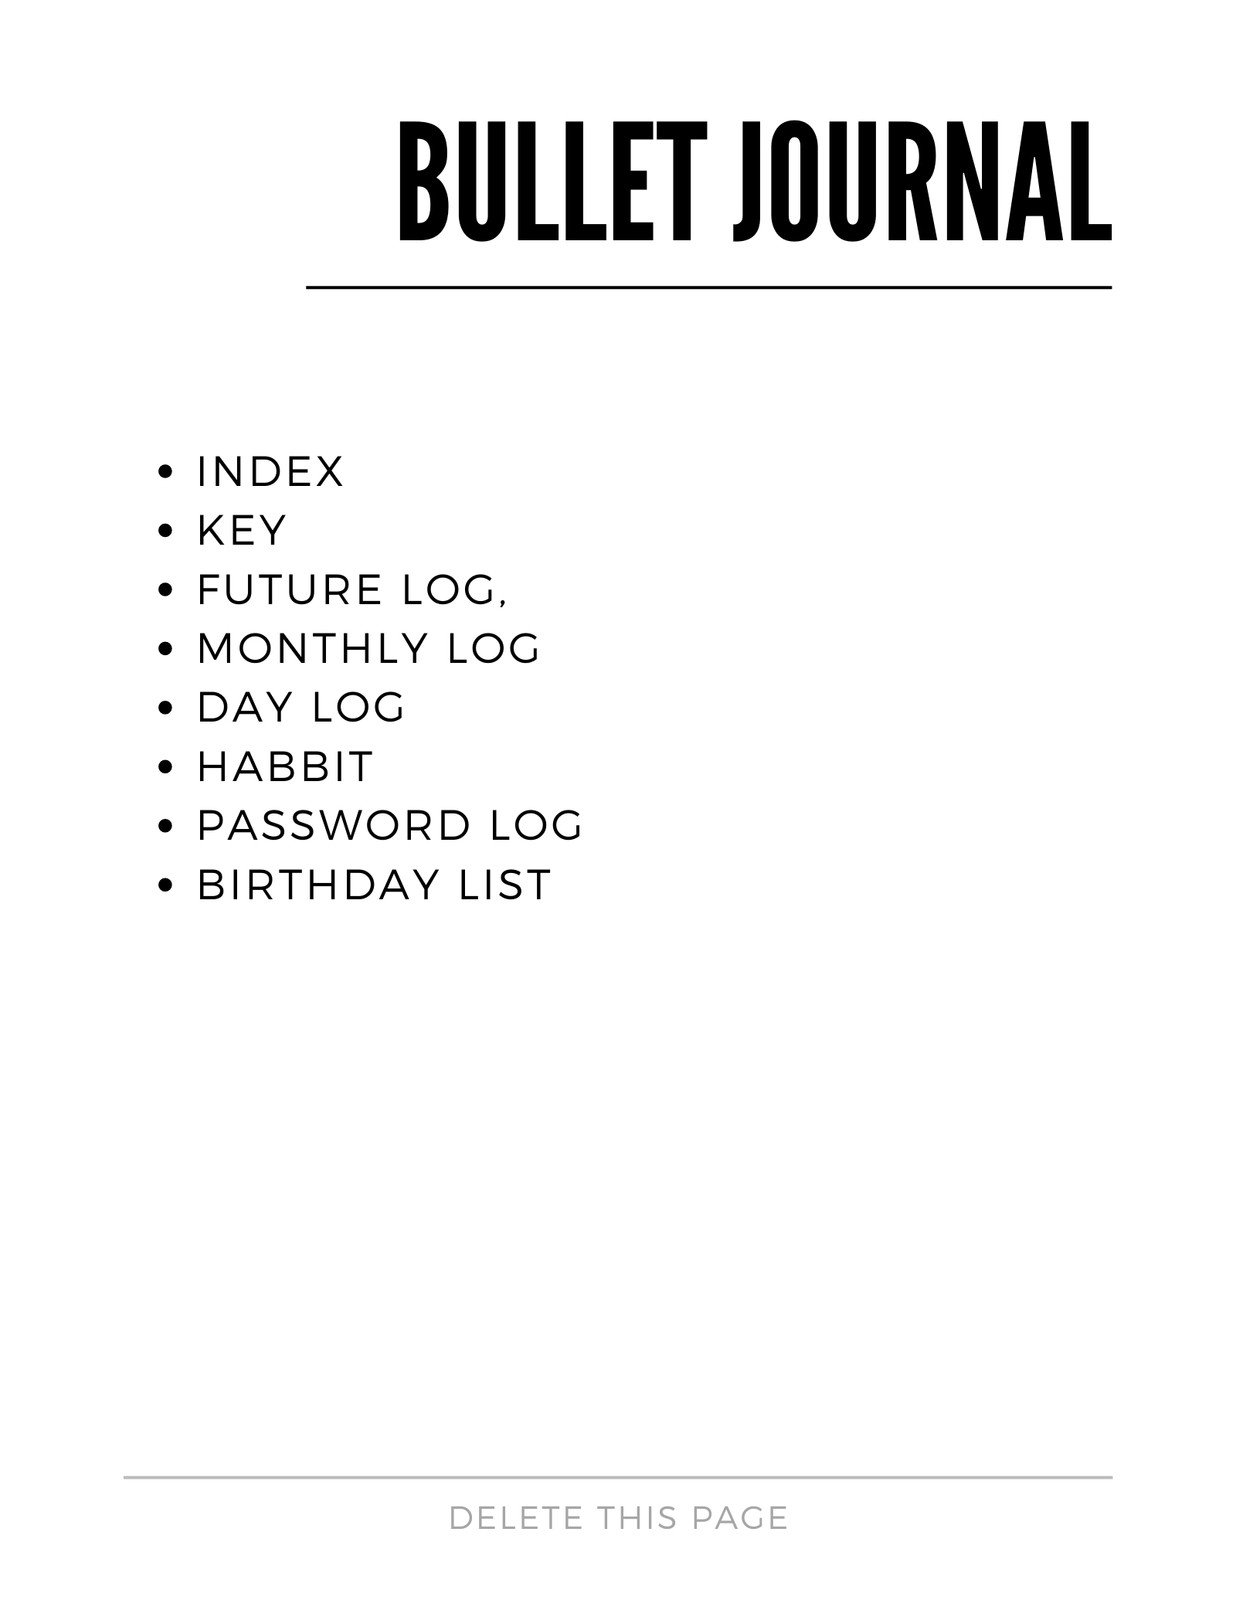 Free and printable bullet journal templates